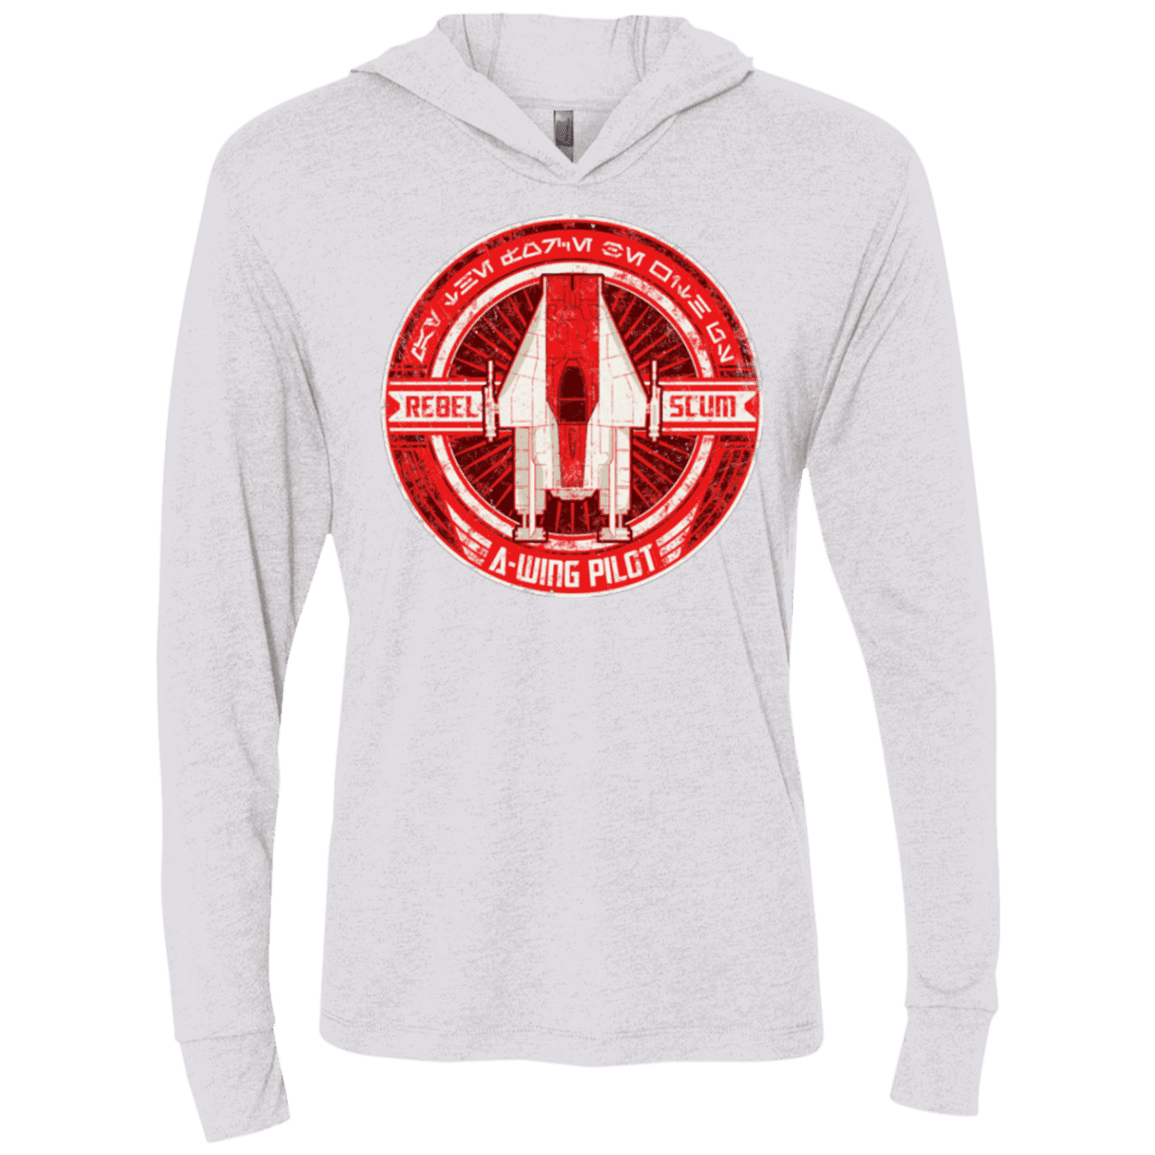 T-Shirts Heather White / X-Small A-Wing Triblend Long Sleeve Hoodie Tee